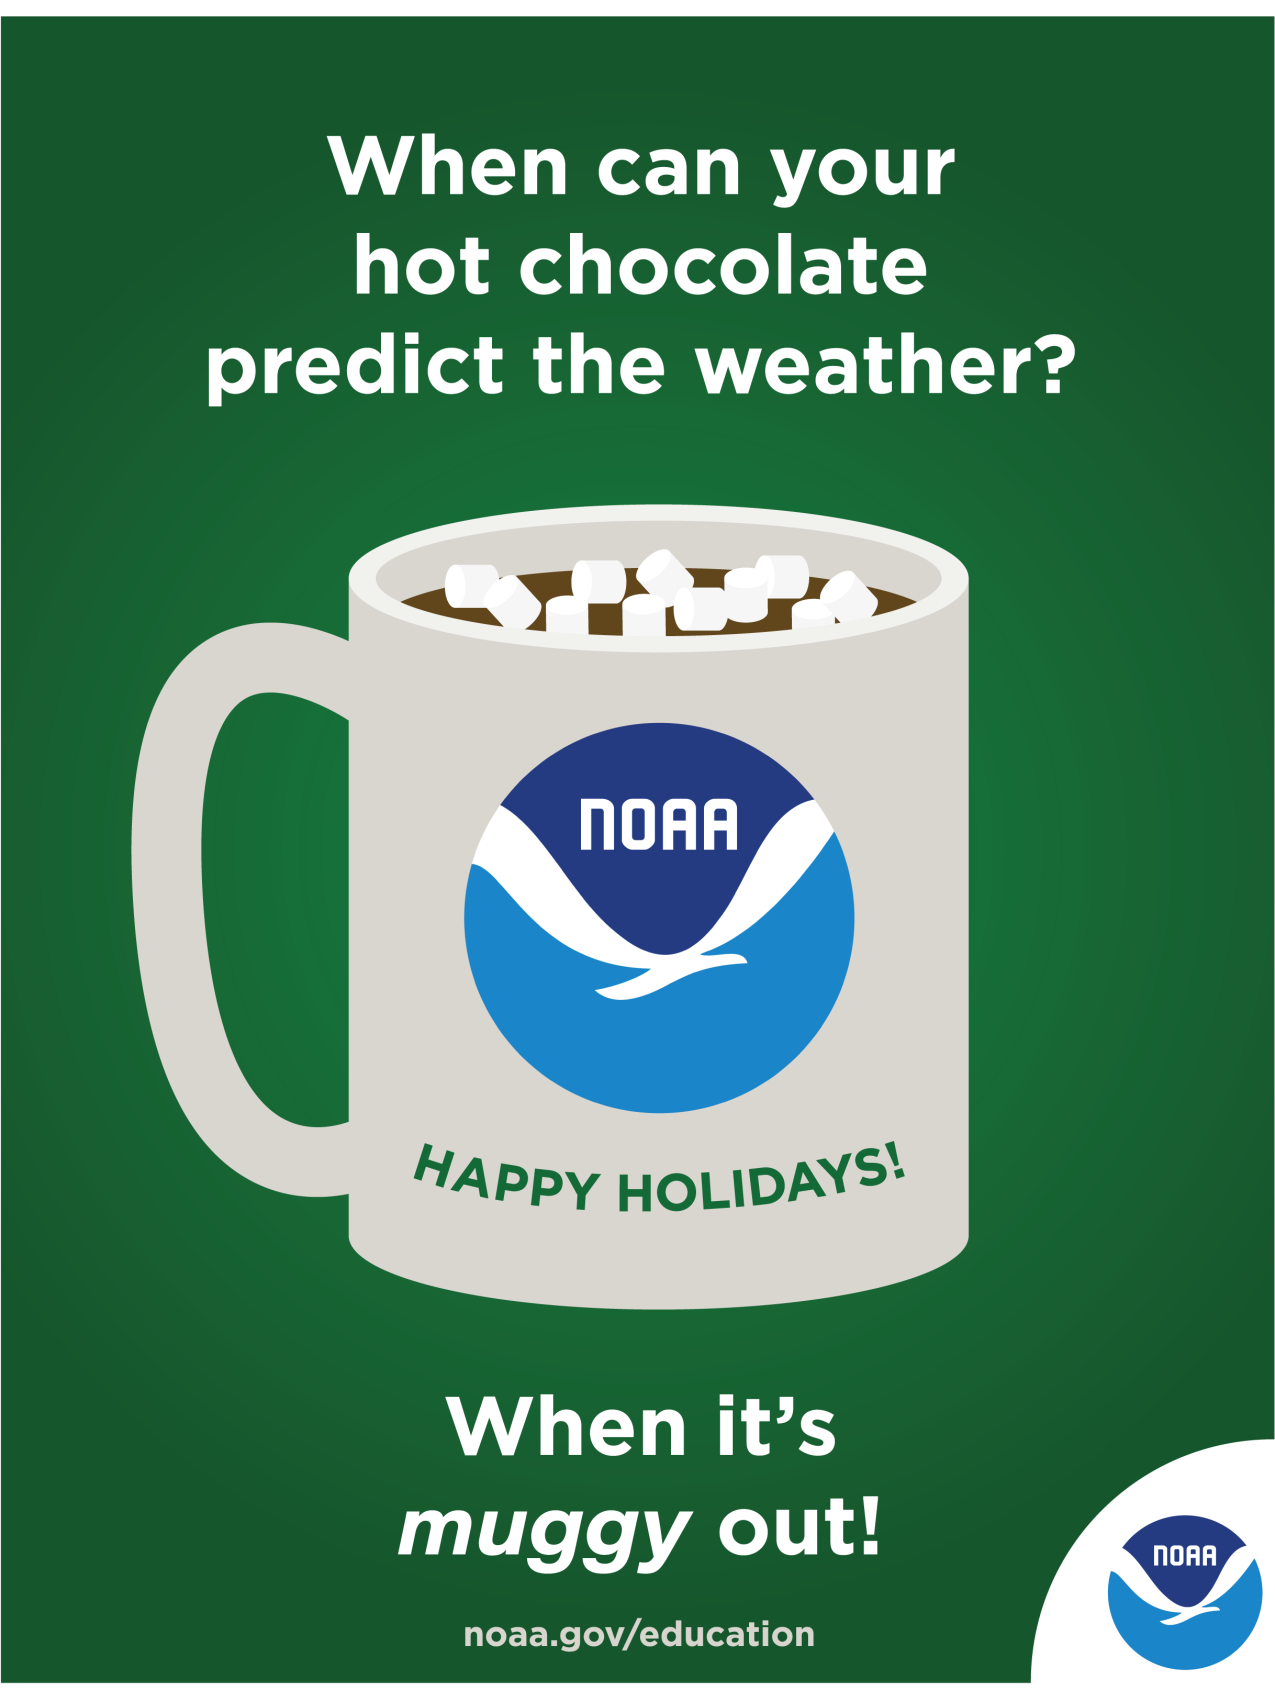 An illustrated holiday card featuring a mug with a NOAA logo that is full of hot chocolate and marshmallows. There is a NOAA logo in the corner of the card.  Text: Happy holidays! When can your hot chocolate predict the weather? When it’s muggy out! noaa.gov/education